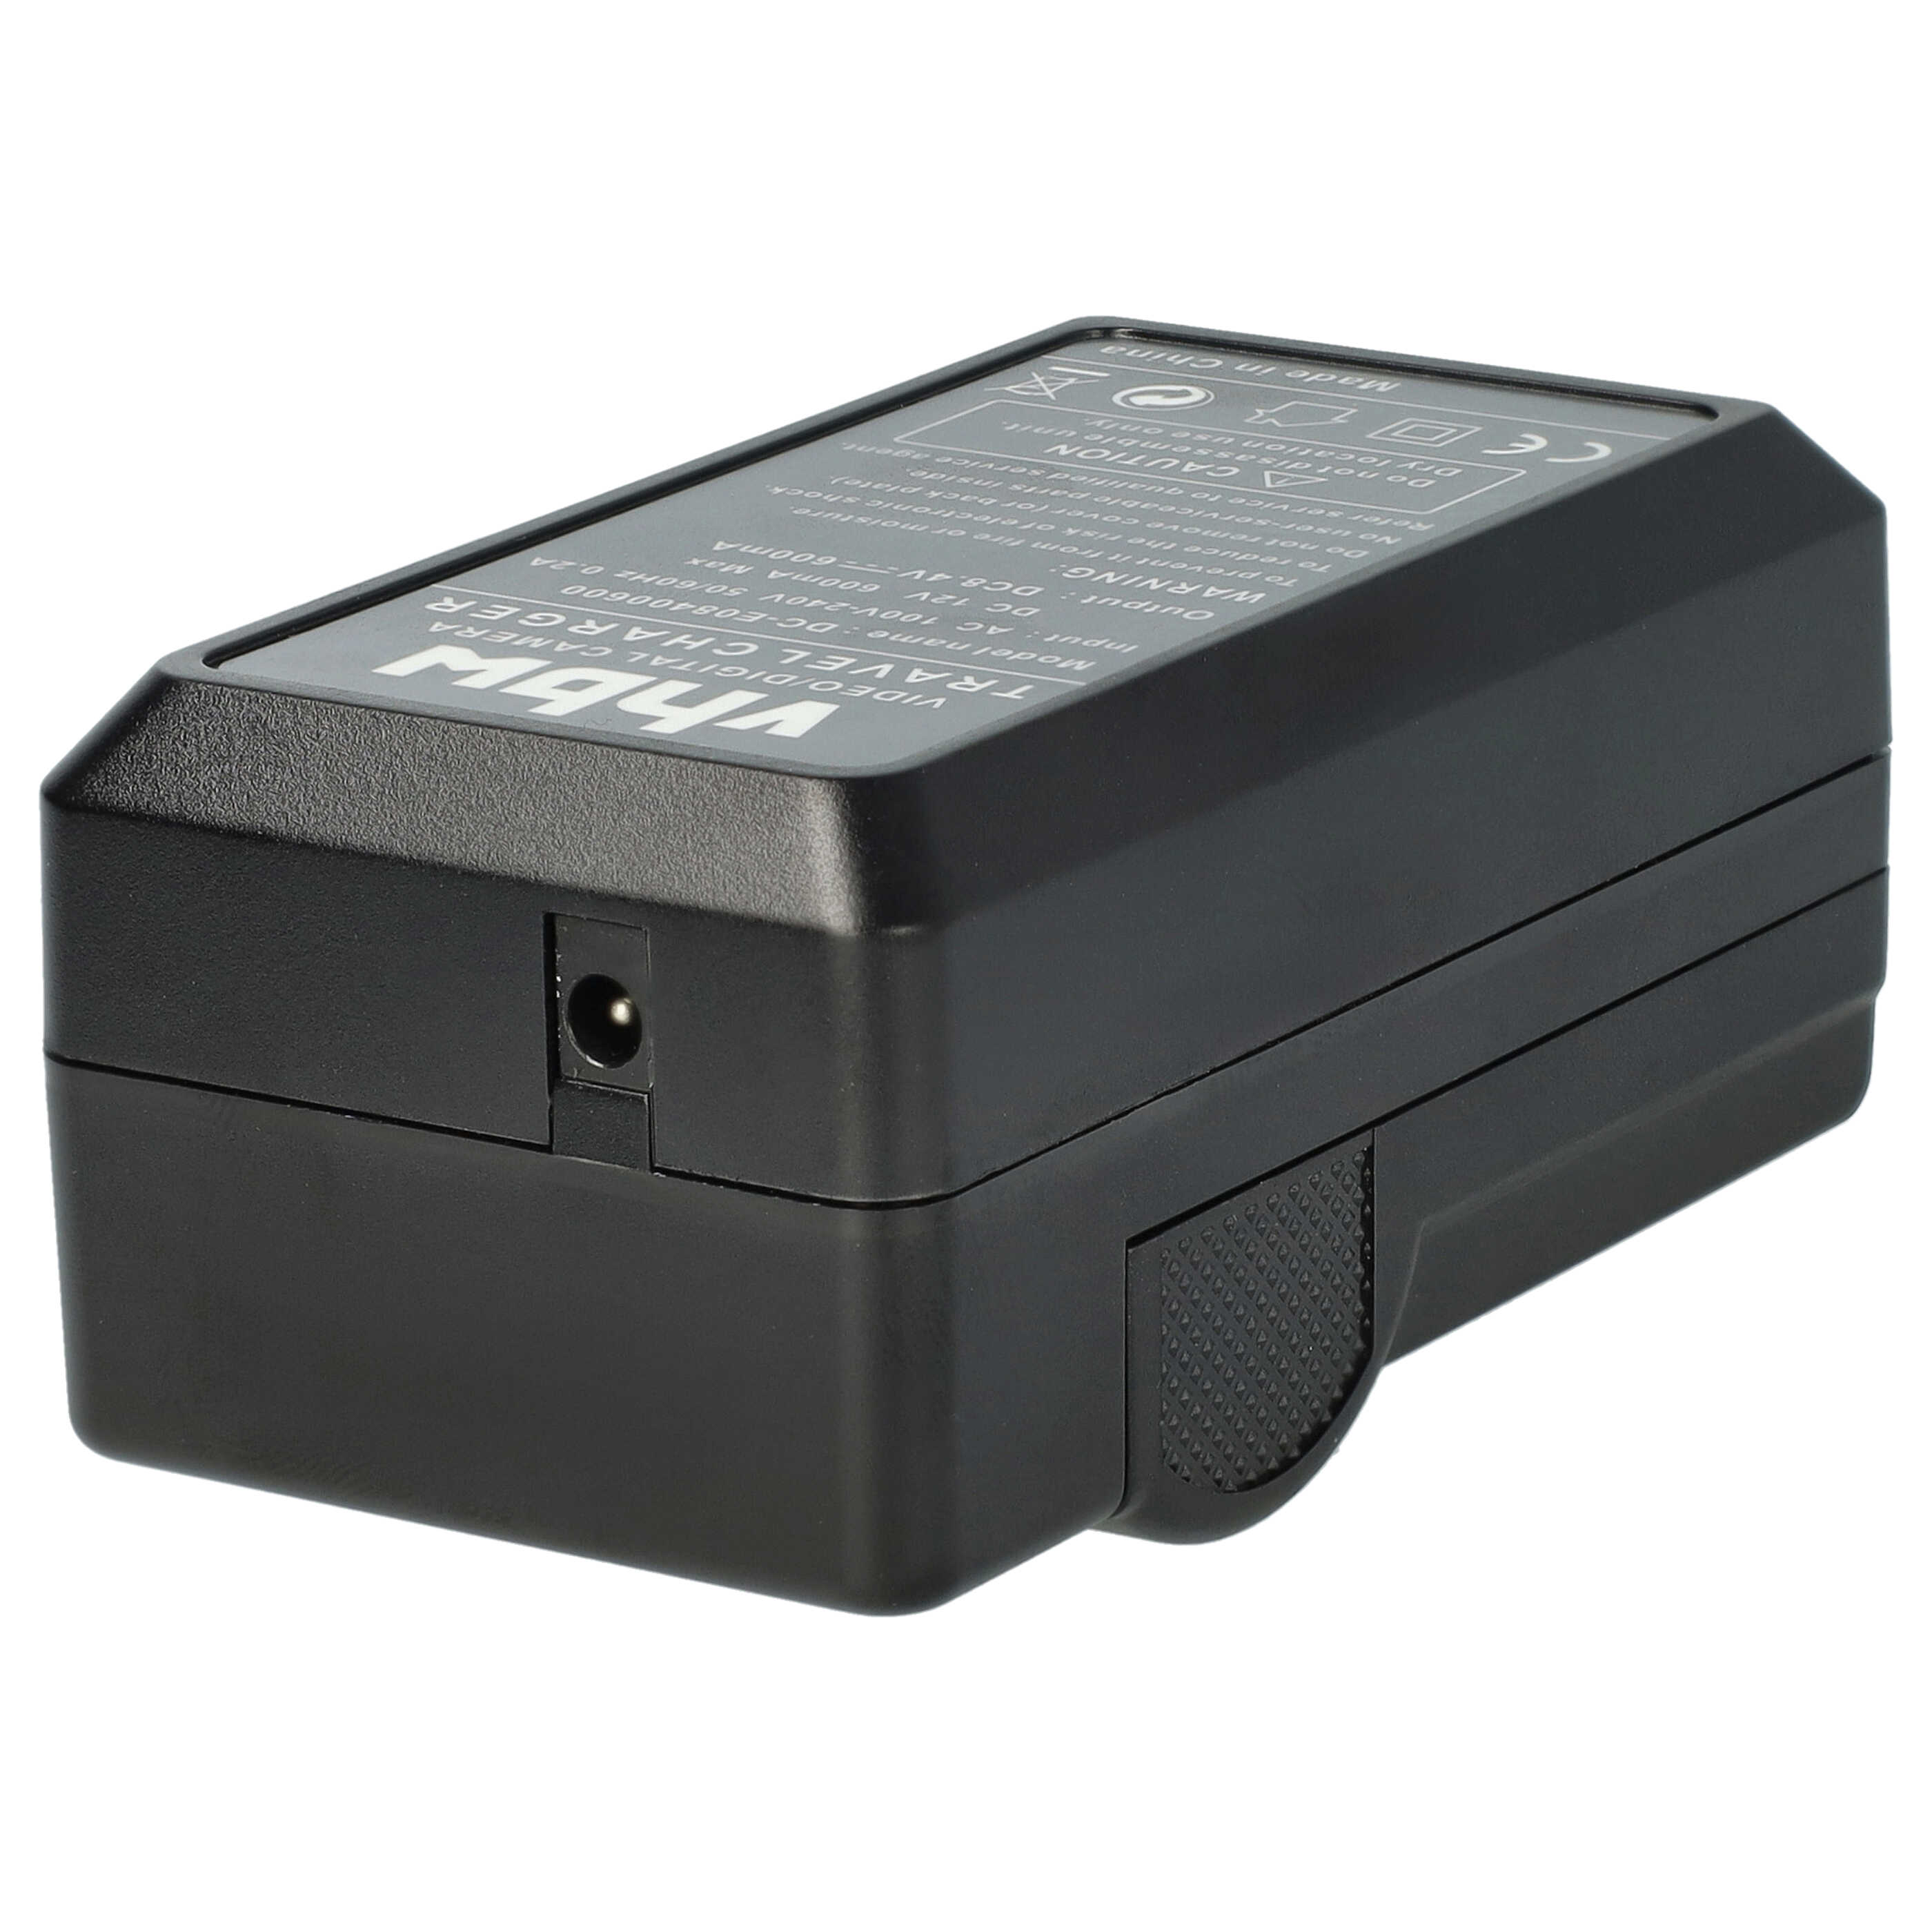 Battery Charger suitable for Sony NP-FW50 Camera etc. - 0.6 A, 8.4 V